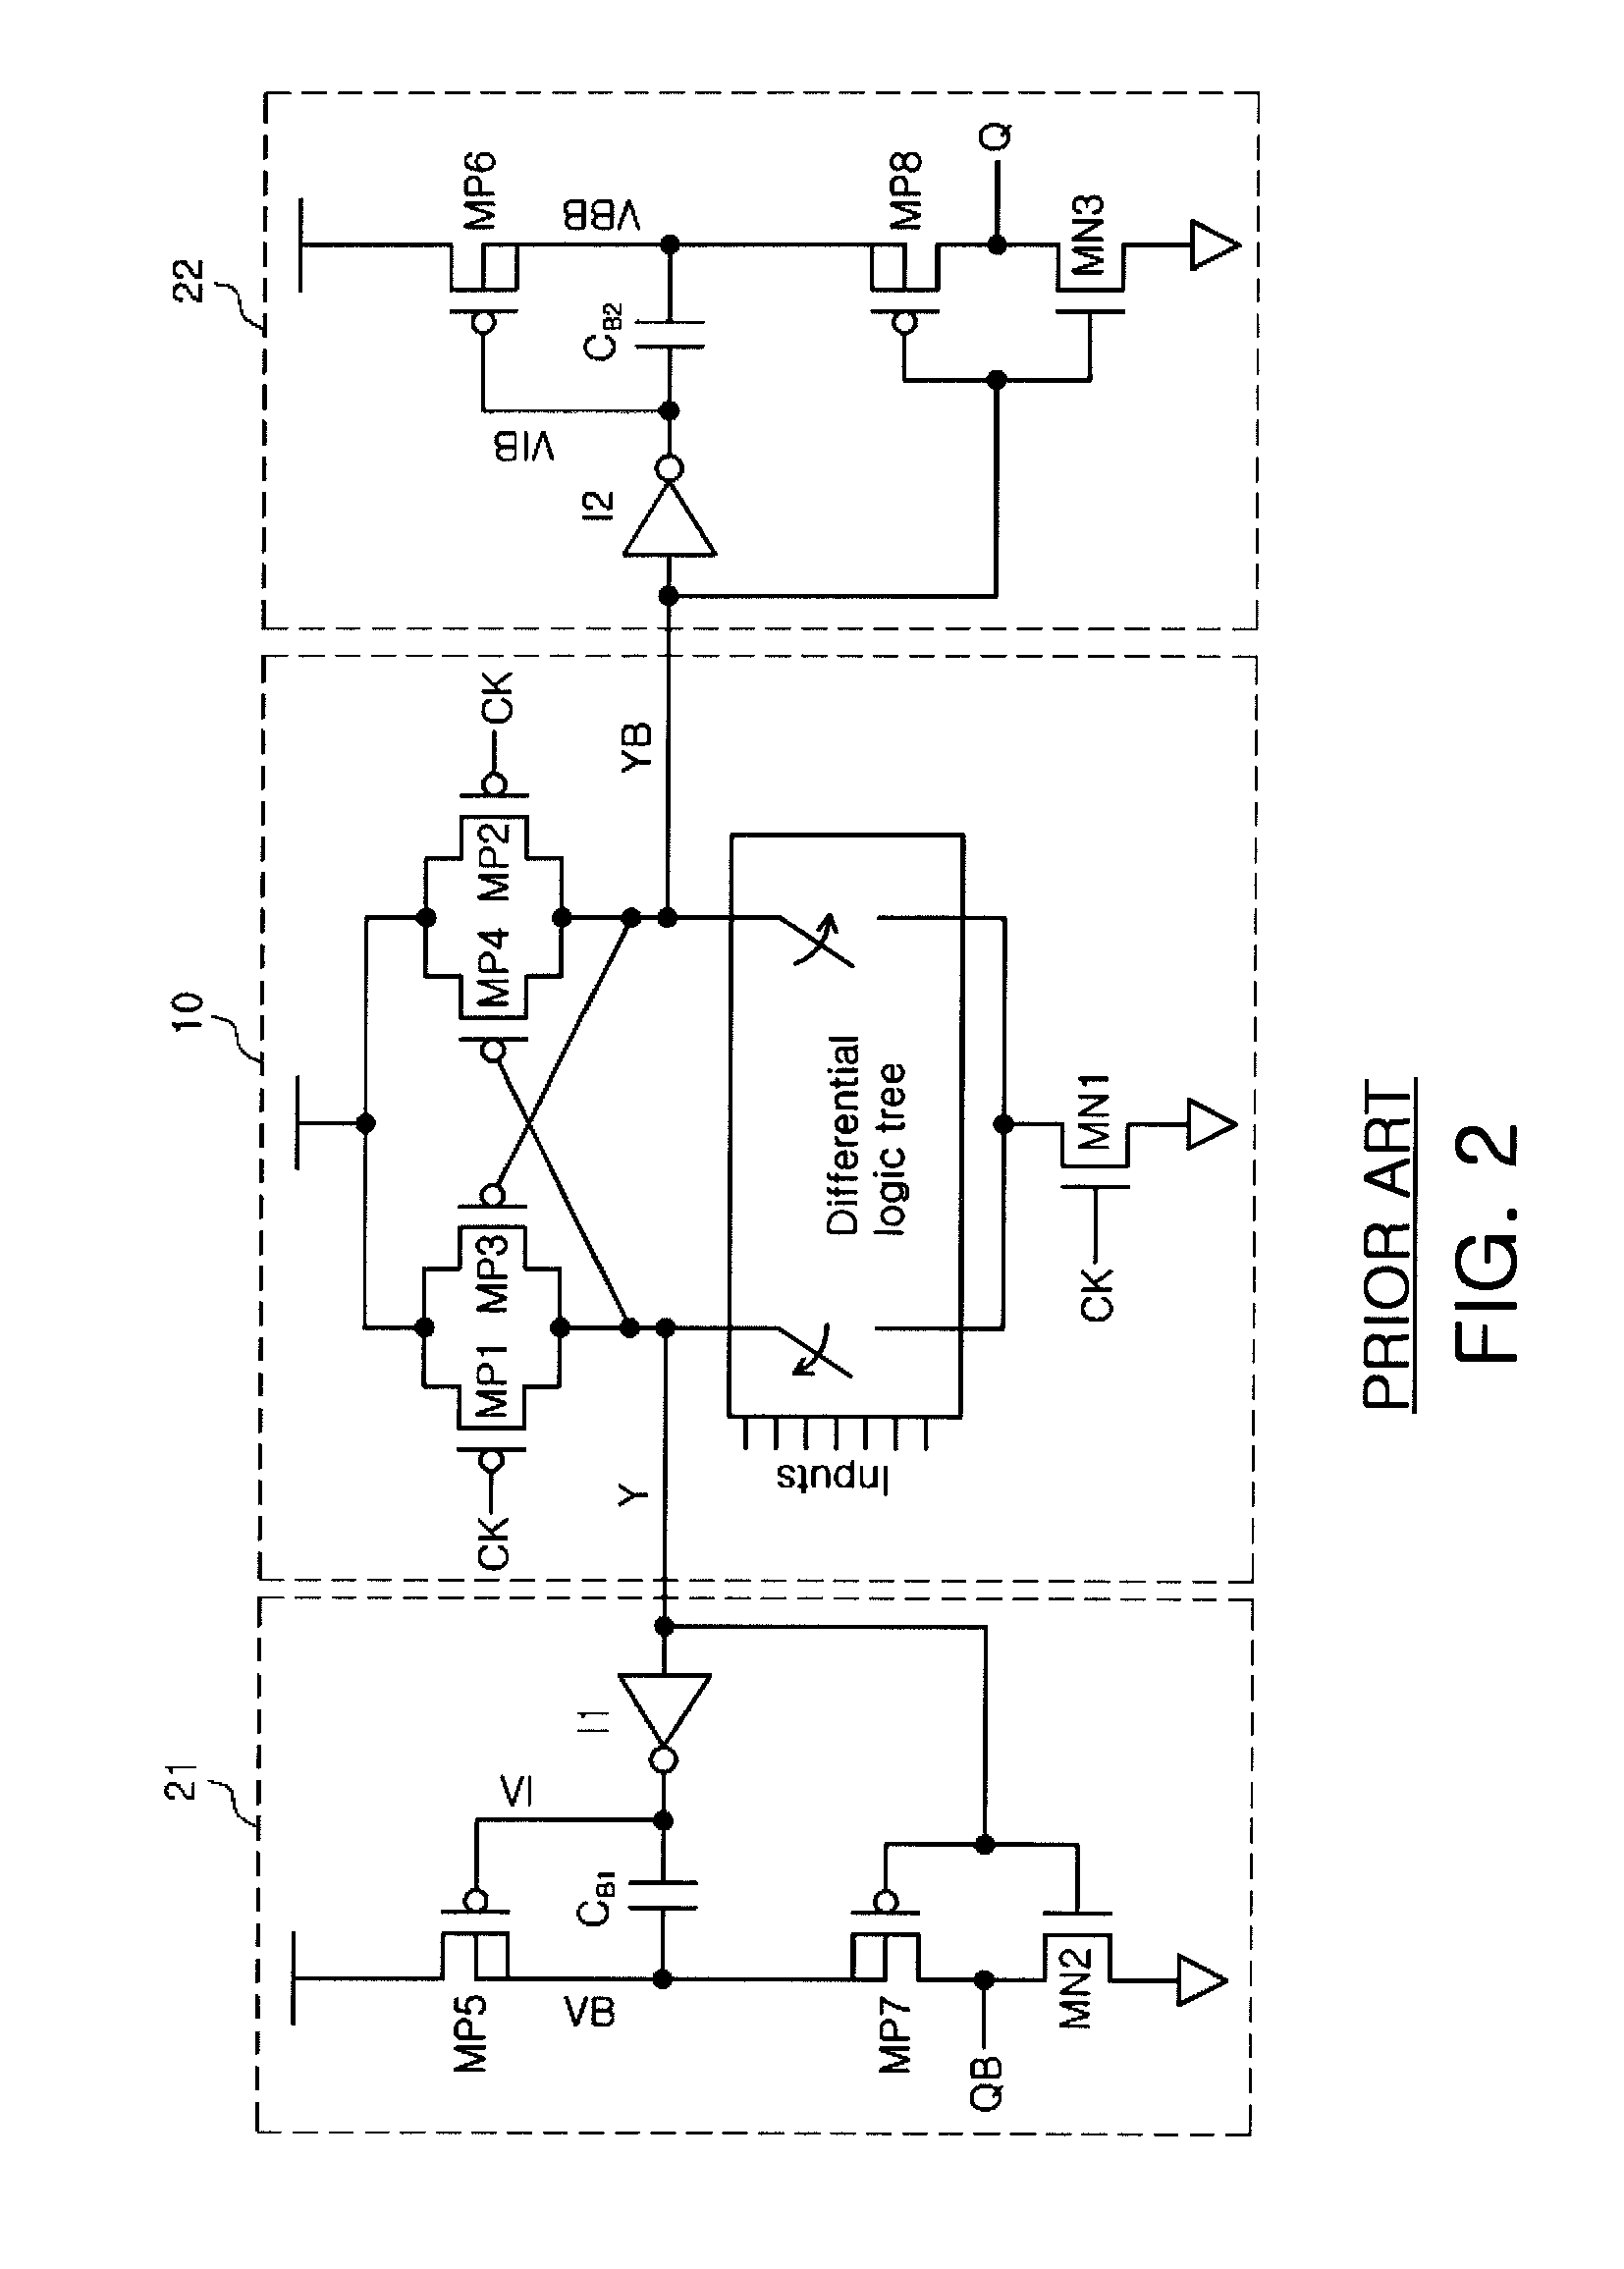 Apparatus for outputting complementary signals using bootstrapping technology